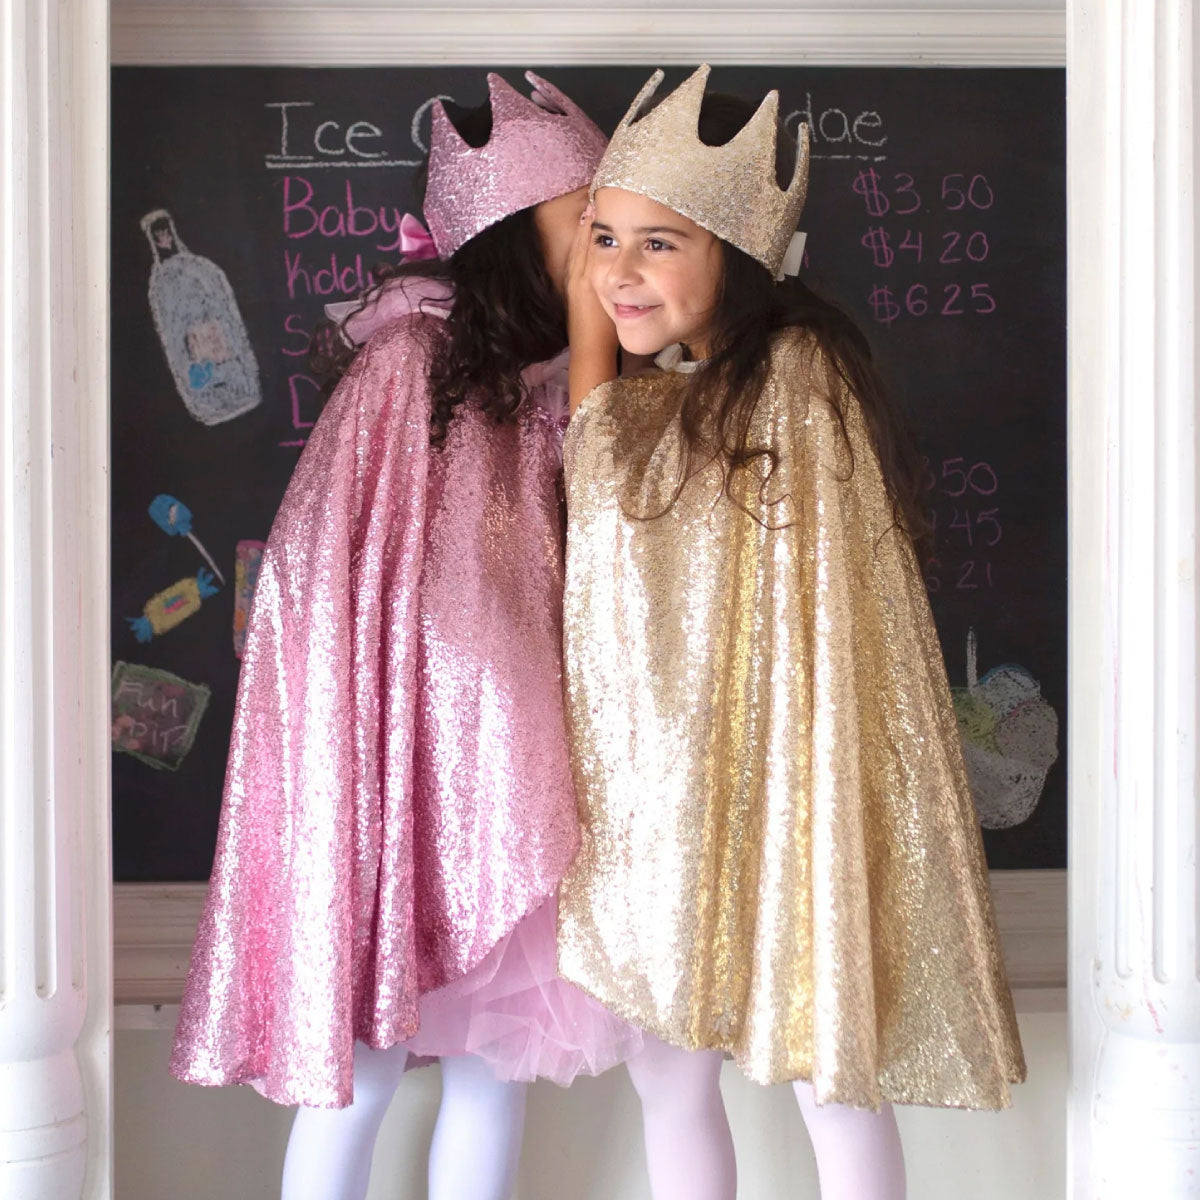 Sequins Capes - Gracious Gold and Precious Pink from Great Pretenders